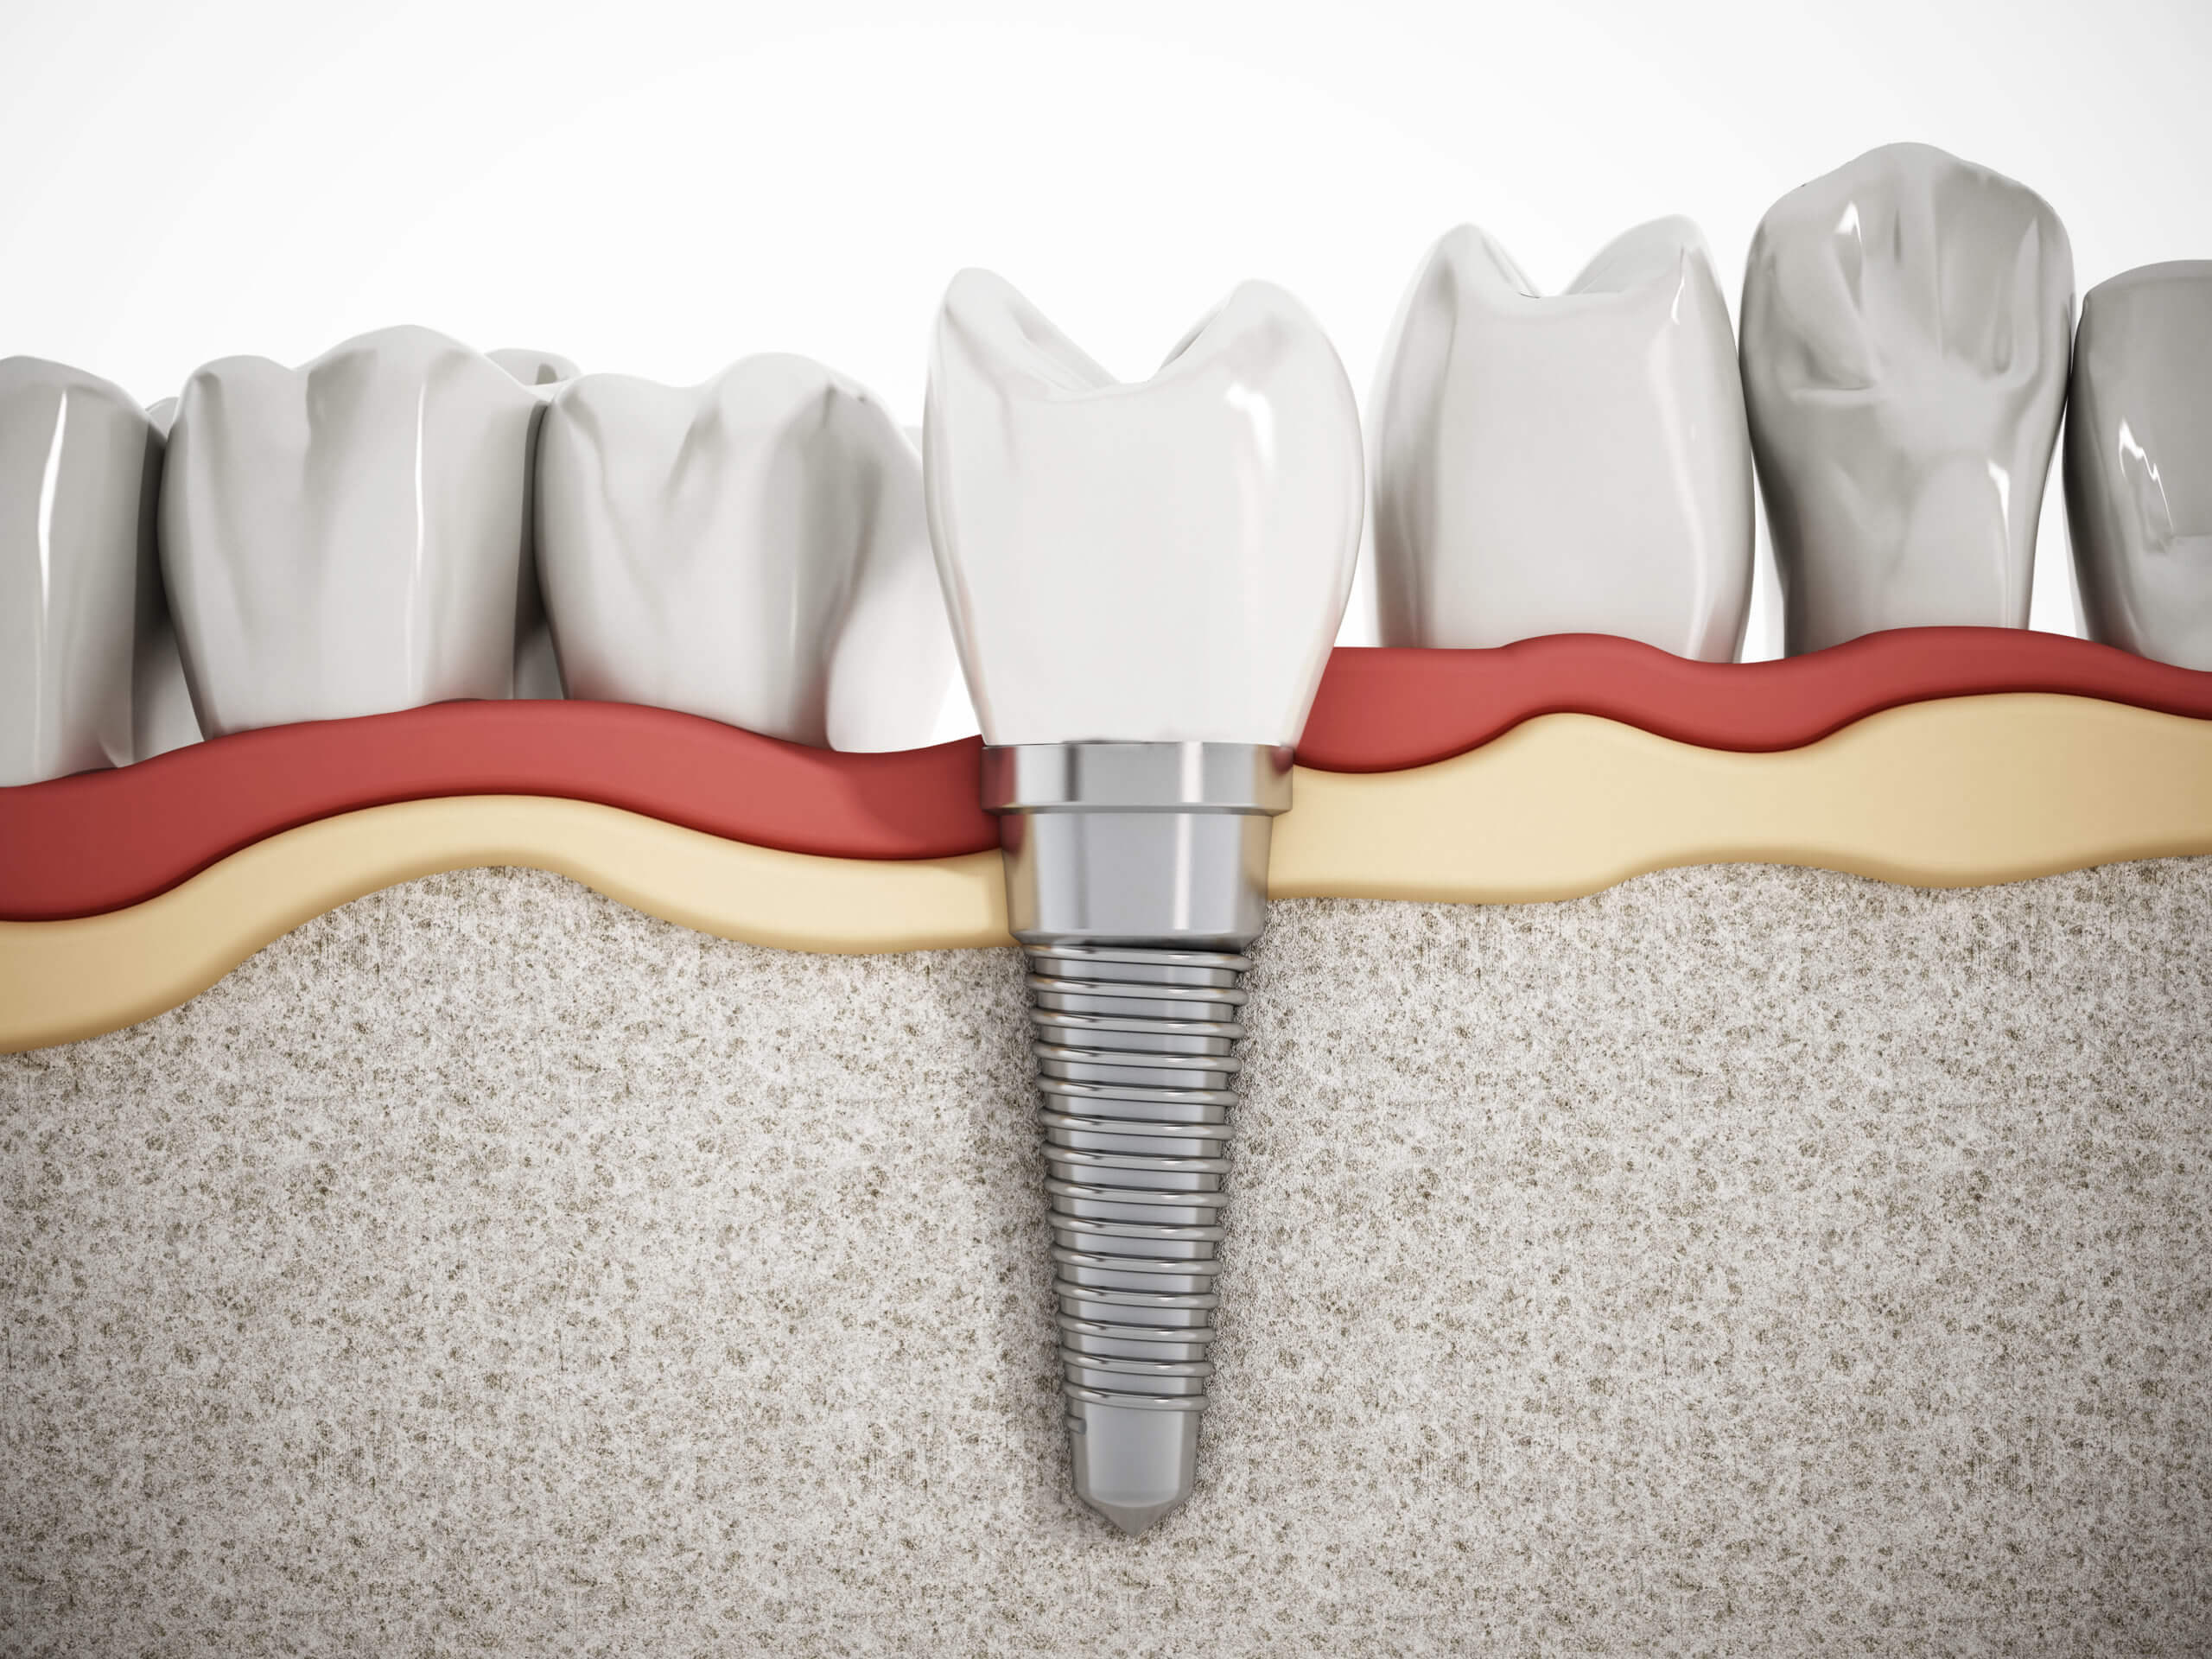 A close up of the tooth implant in its place